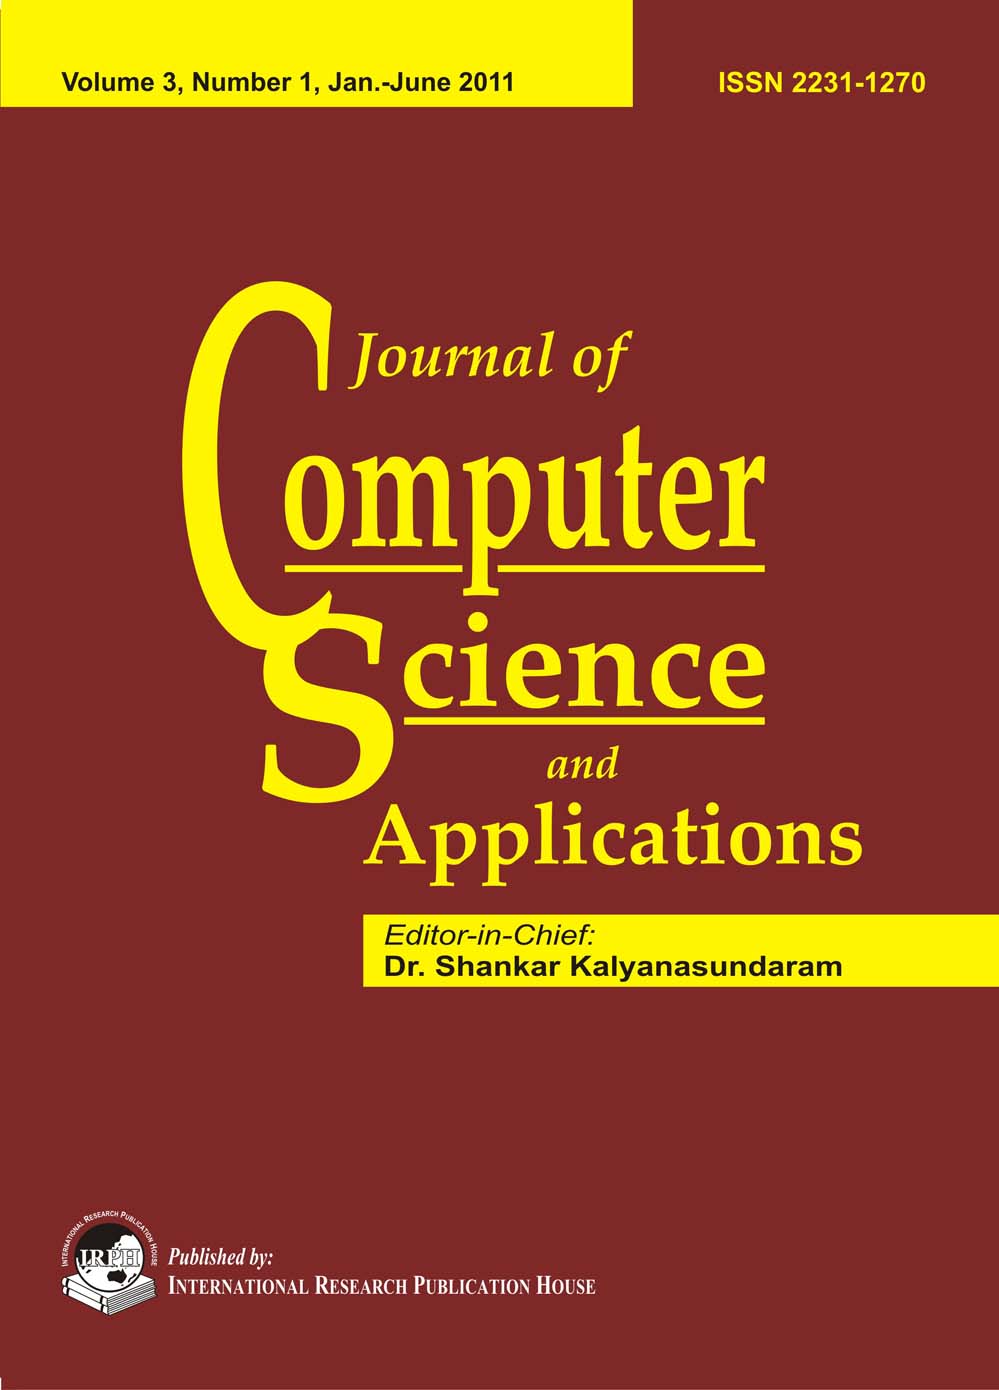 JCSA, Journal of Computer Science and Applications